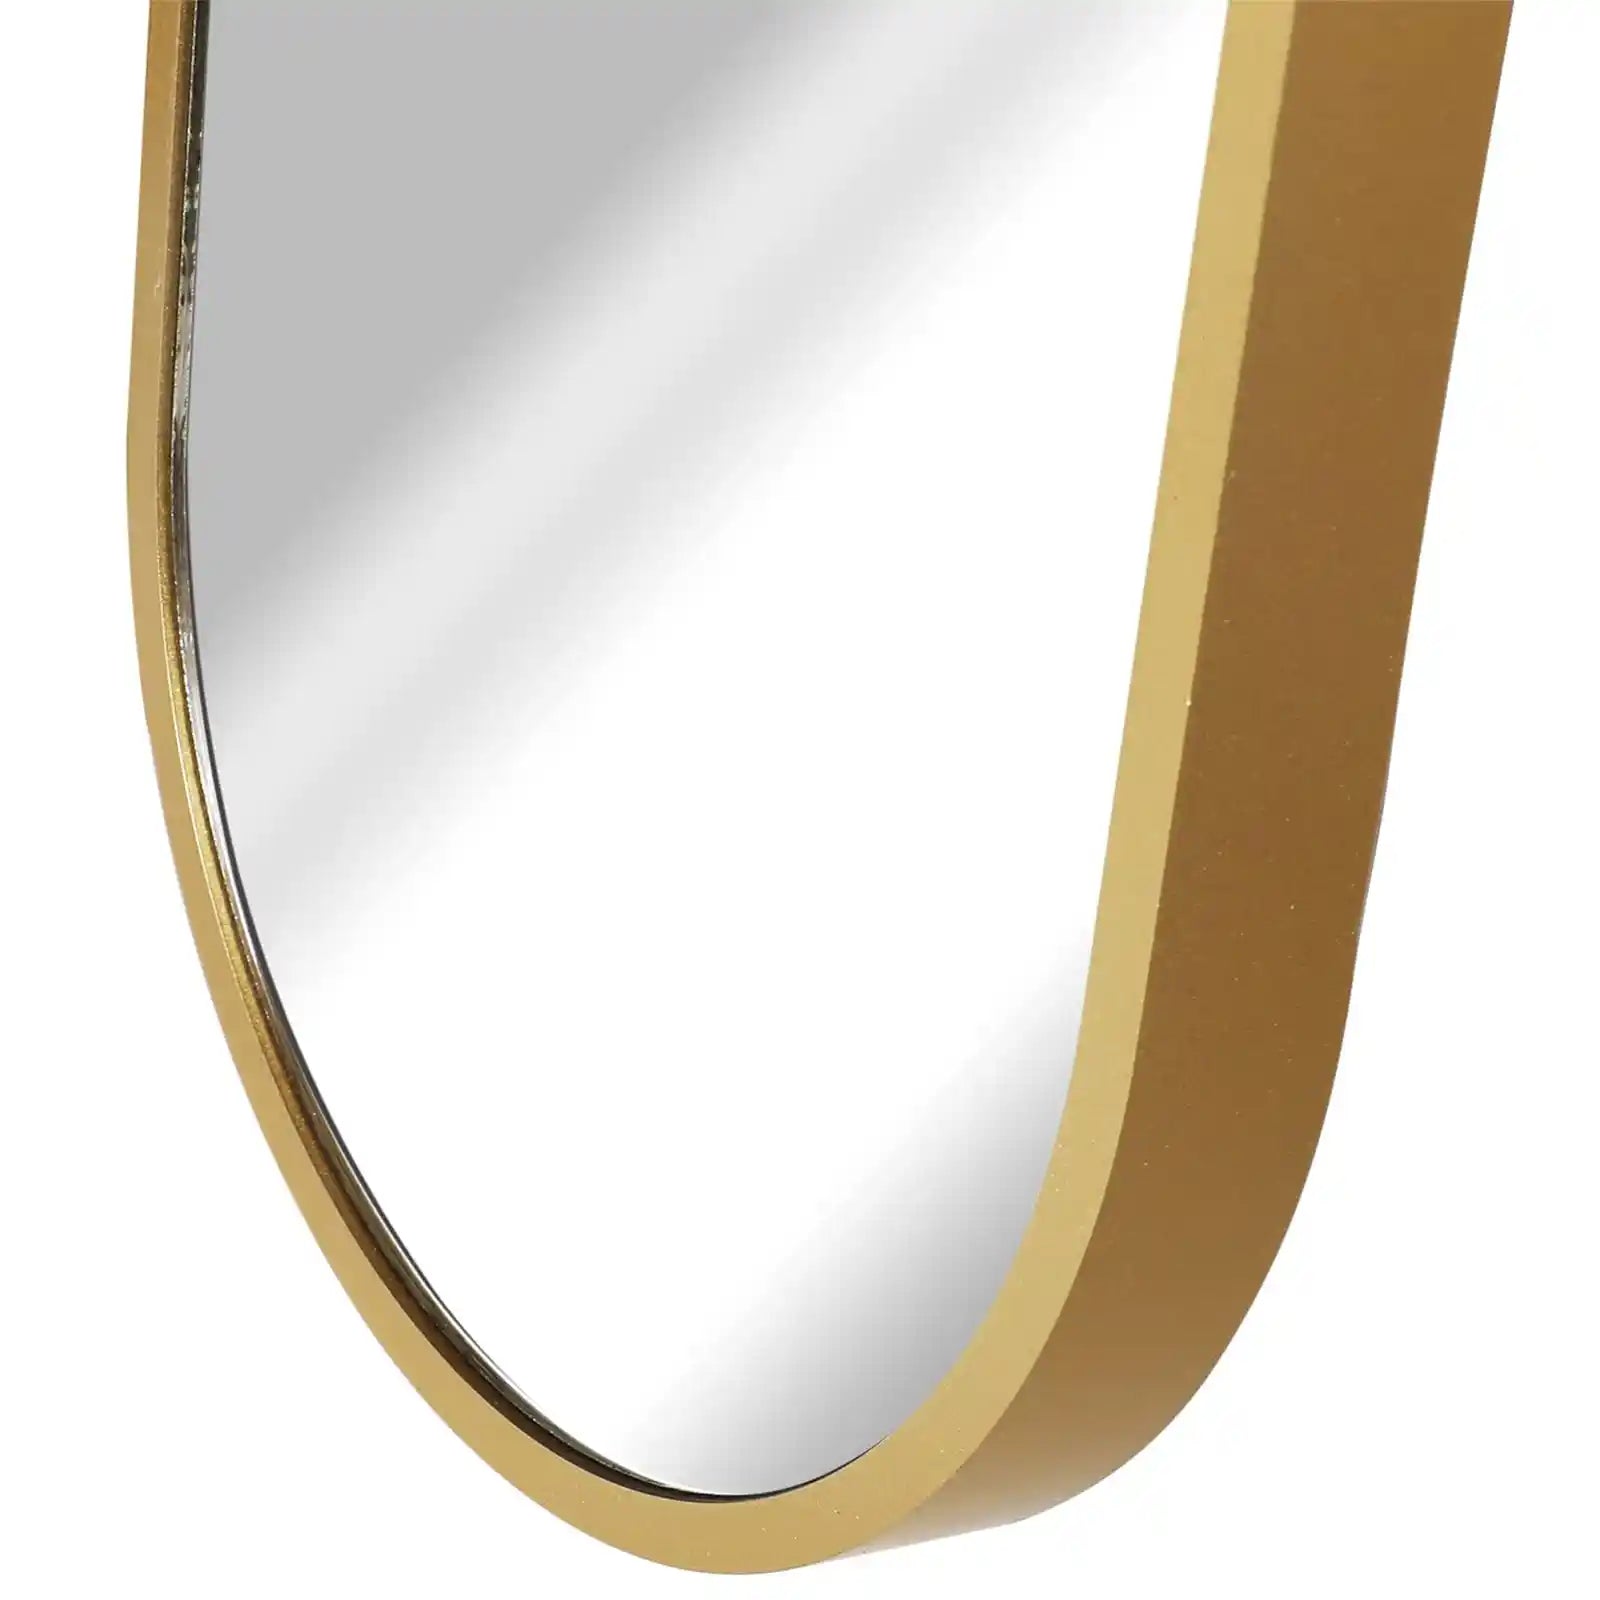 Decorative Oval Gold Mirror Set of 3, 40" x 8" Modern Gold Wall Mirror for Home, Bathroom, Living Room